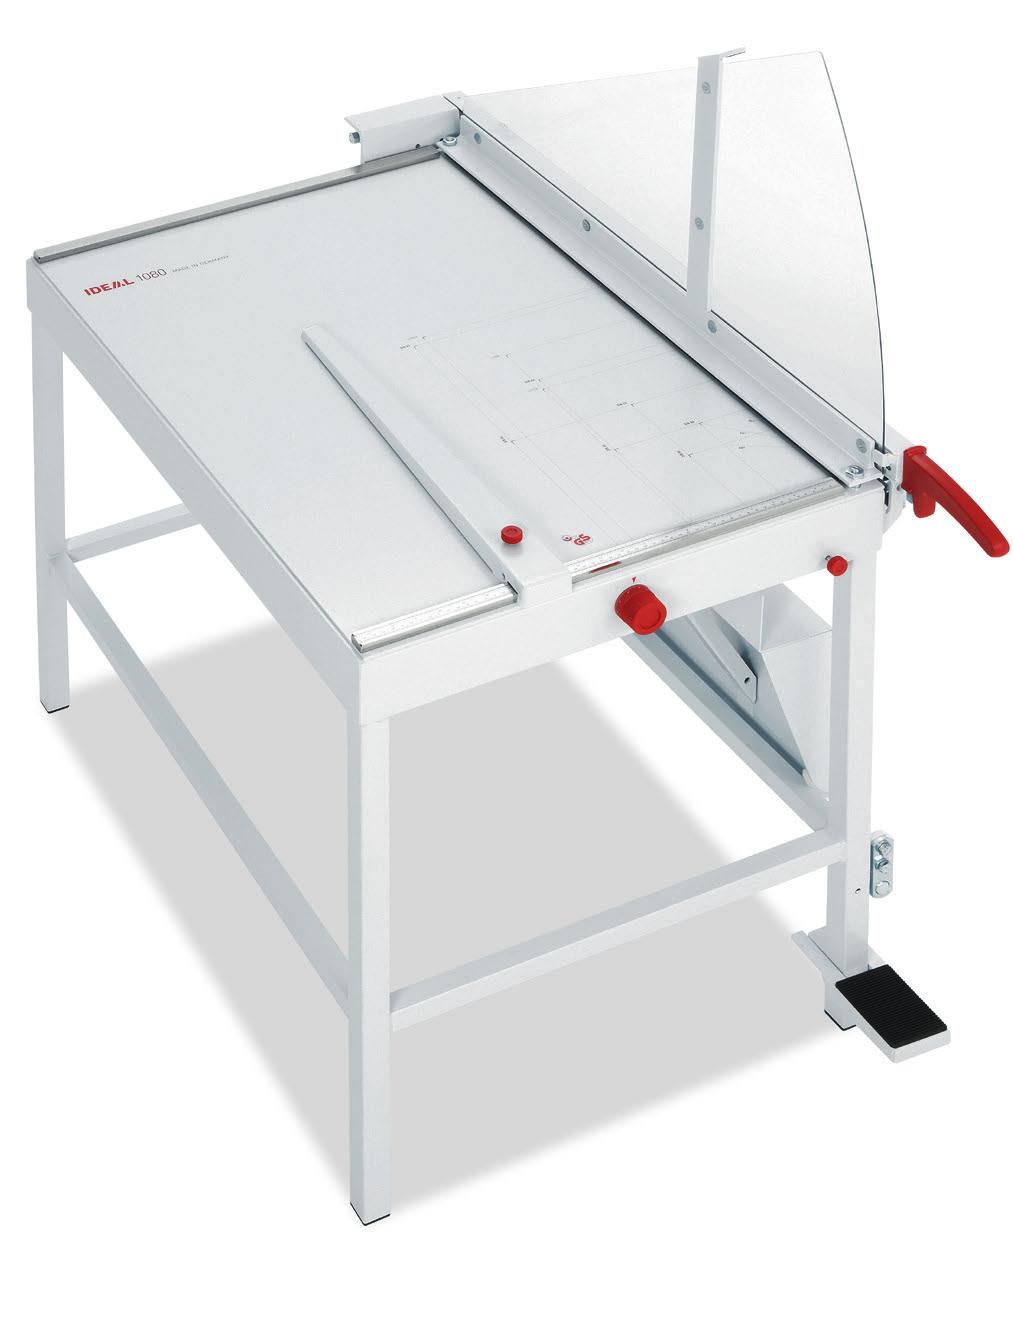 1/4 x 48 (35 W with fold-away extension table in working position) TRIUMPH 1071 Tabletop trimmer with adjustable clamp and paper